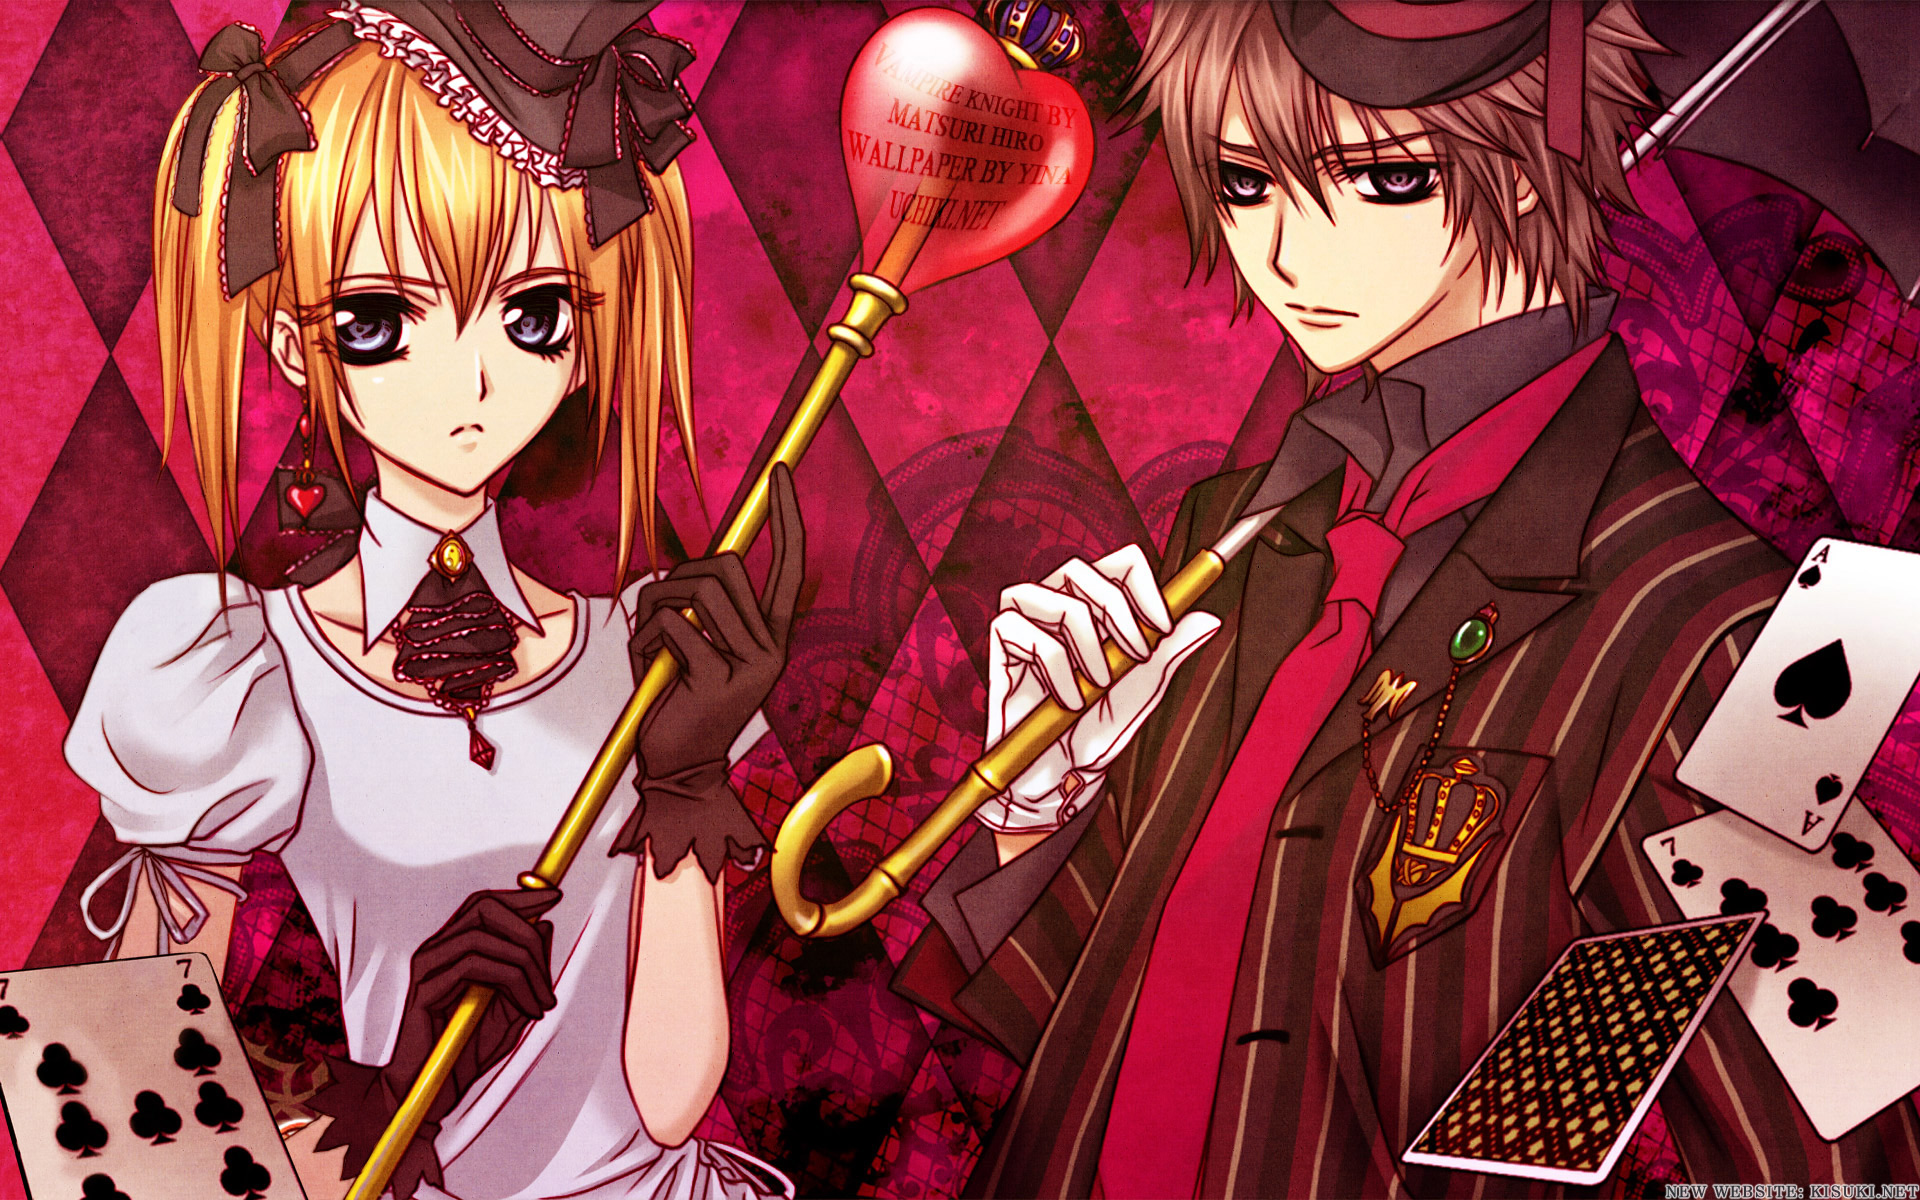 Rima and Shiki, characters from Vampire Knight, in a captivating anime desktop wallpaper.